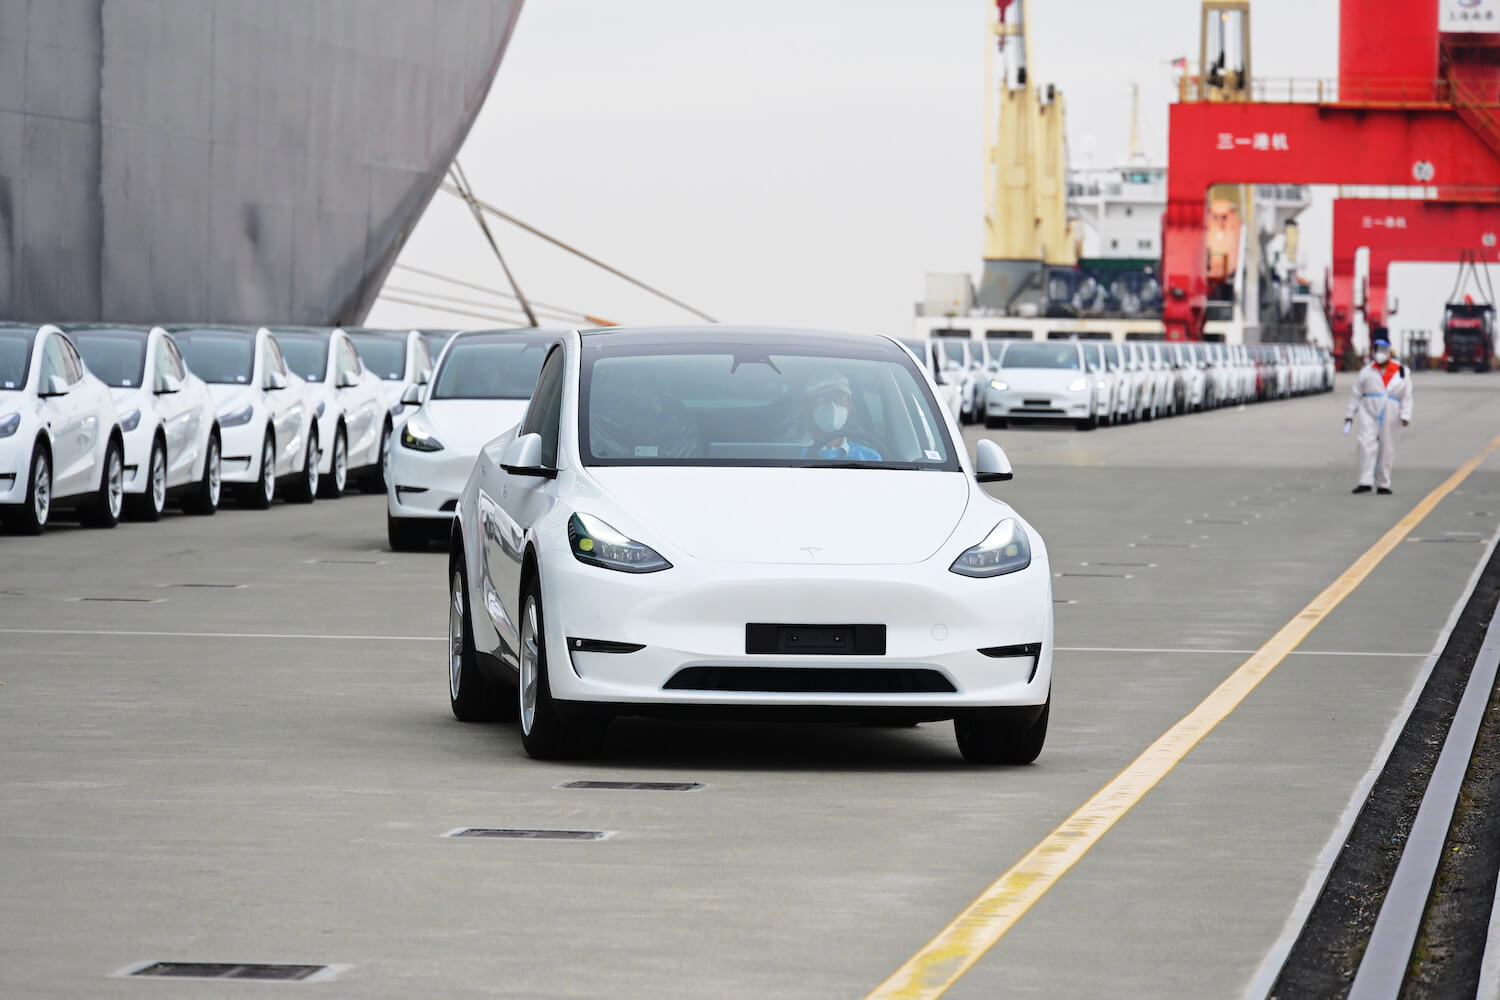 A white Tesla Model Y electric SUV in a harbor being exported to China for foreign sales, a transport ship visible in the background.